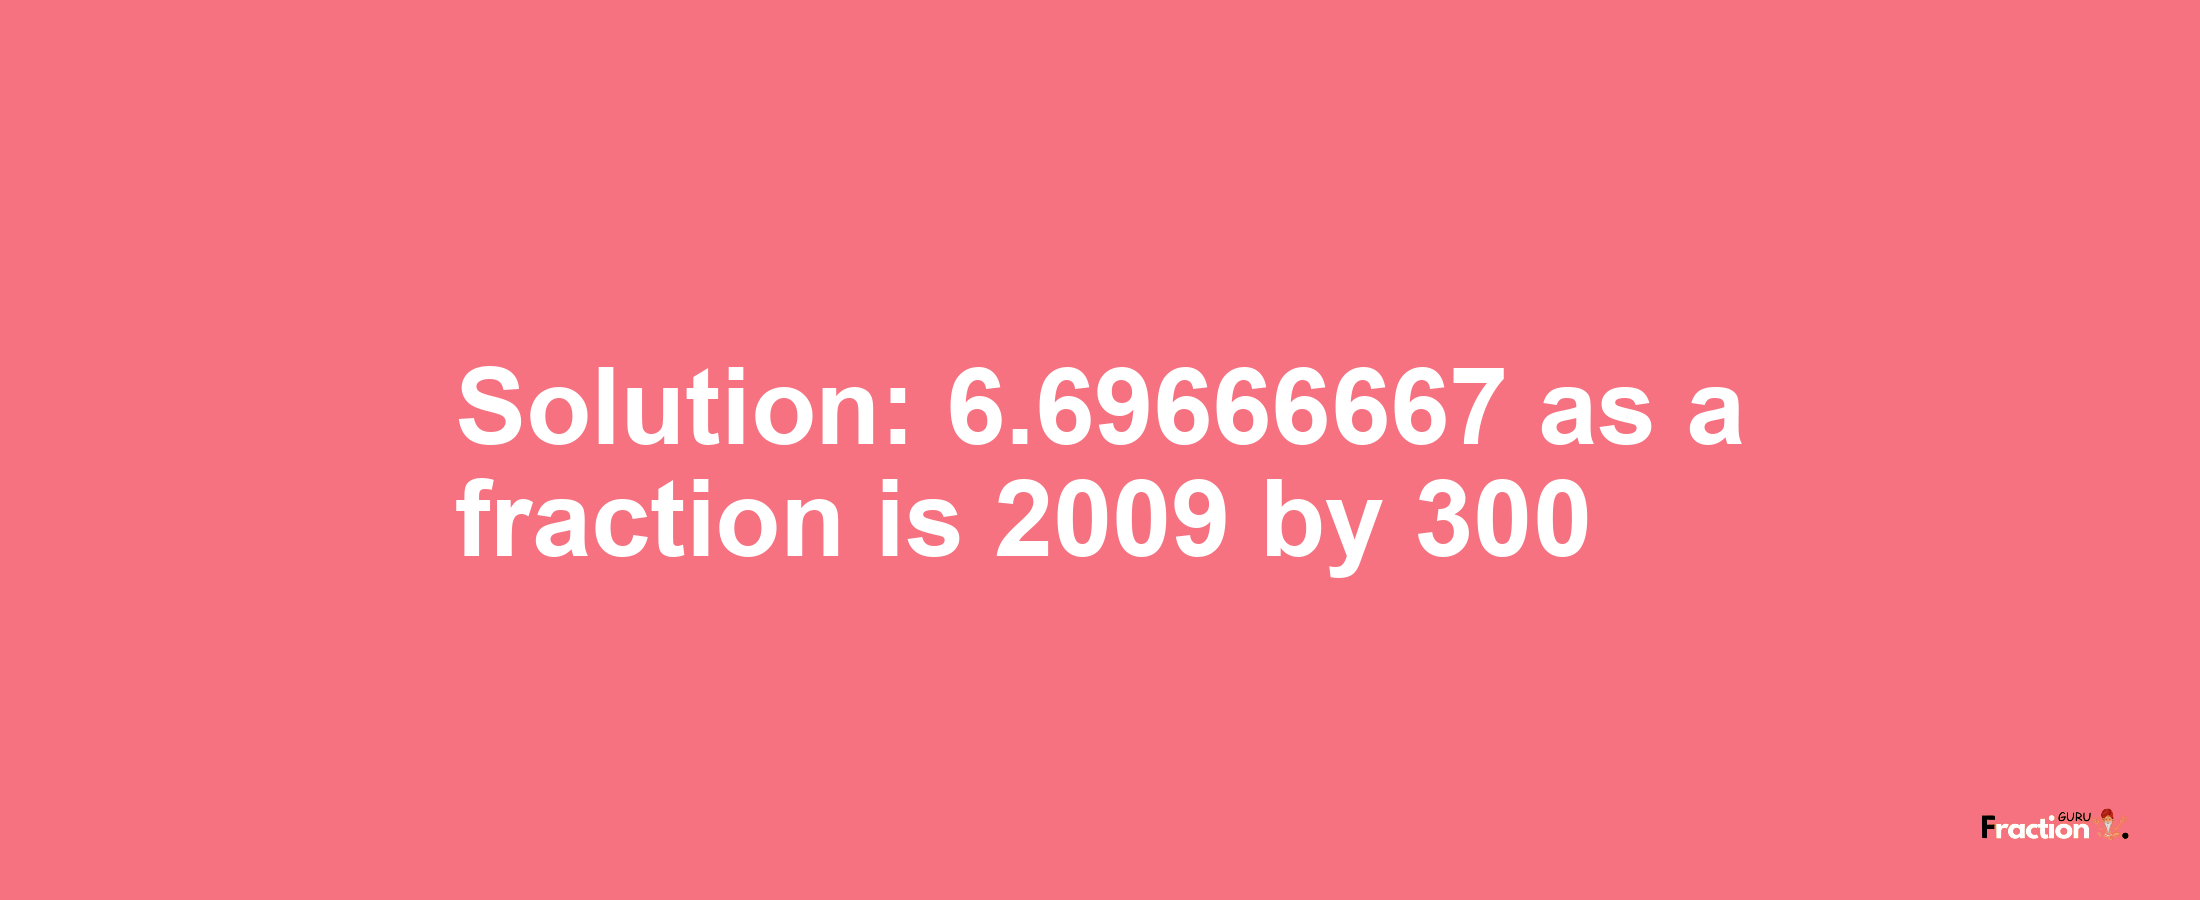 Solution:6.69666667 as a fraction is 2009/300